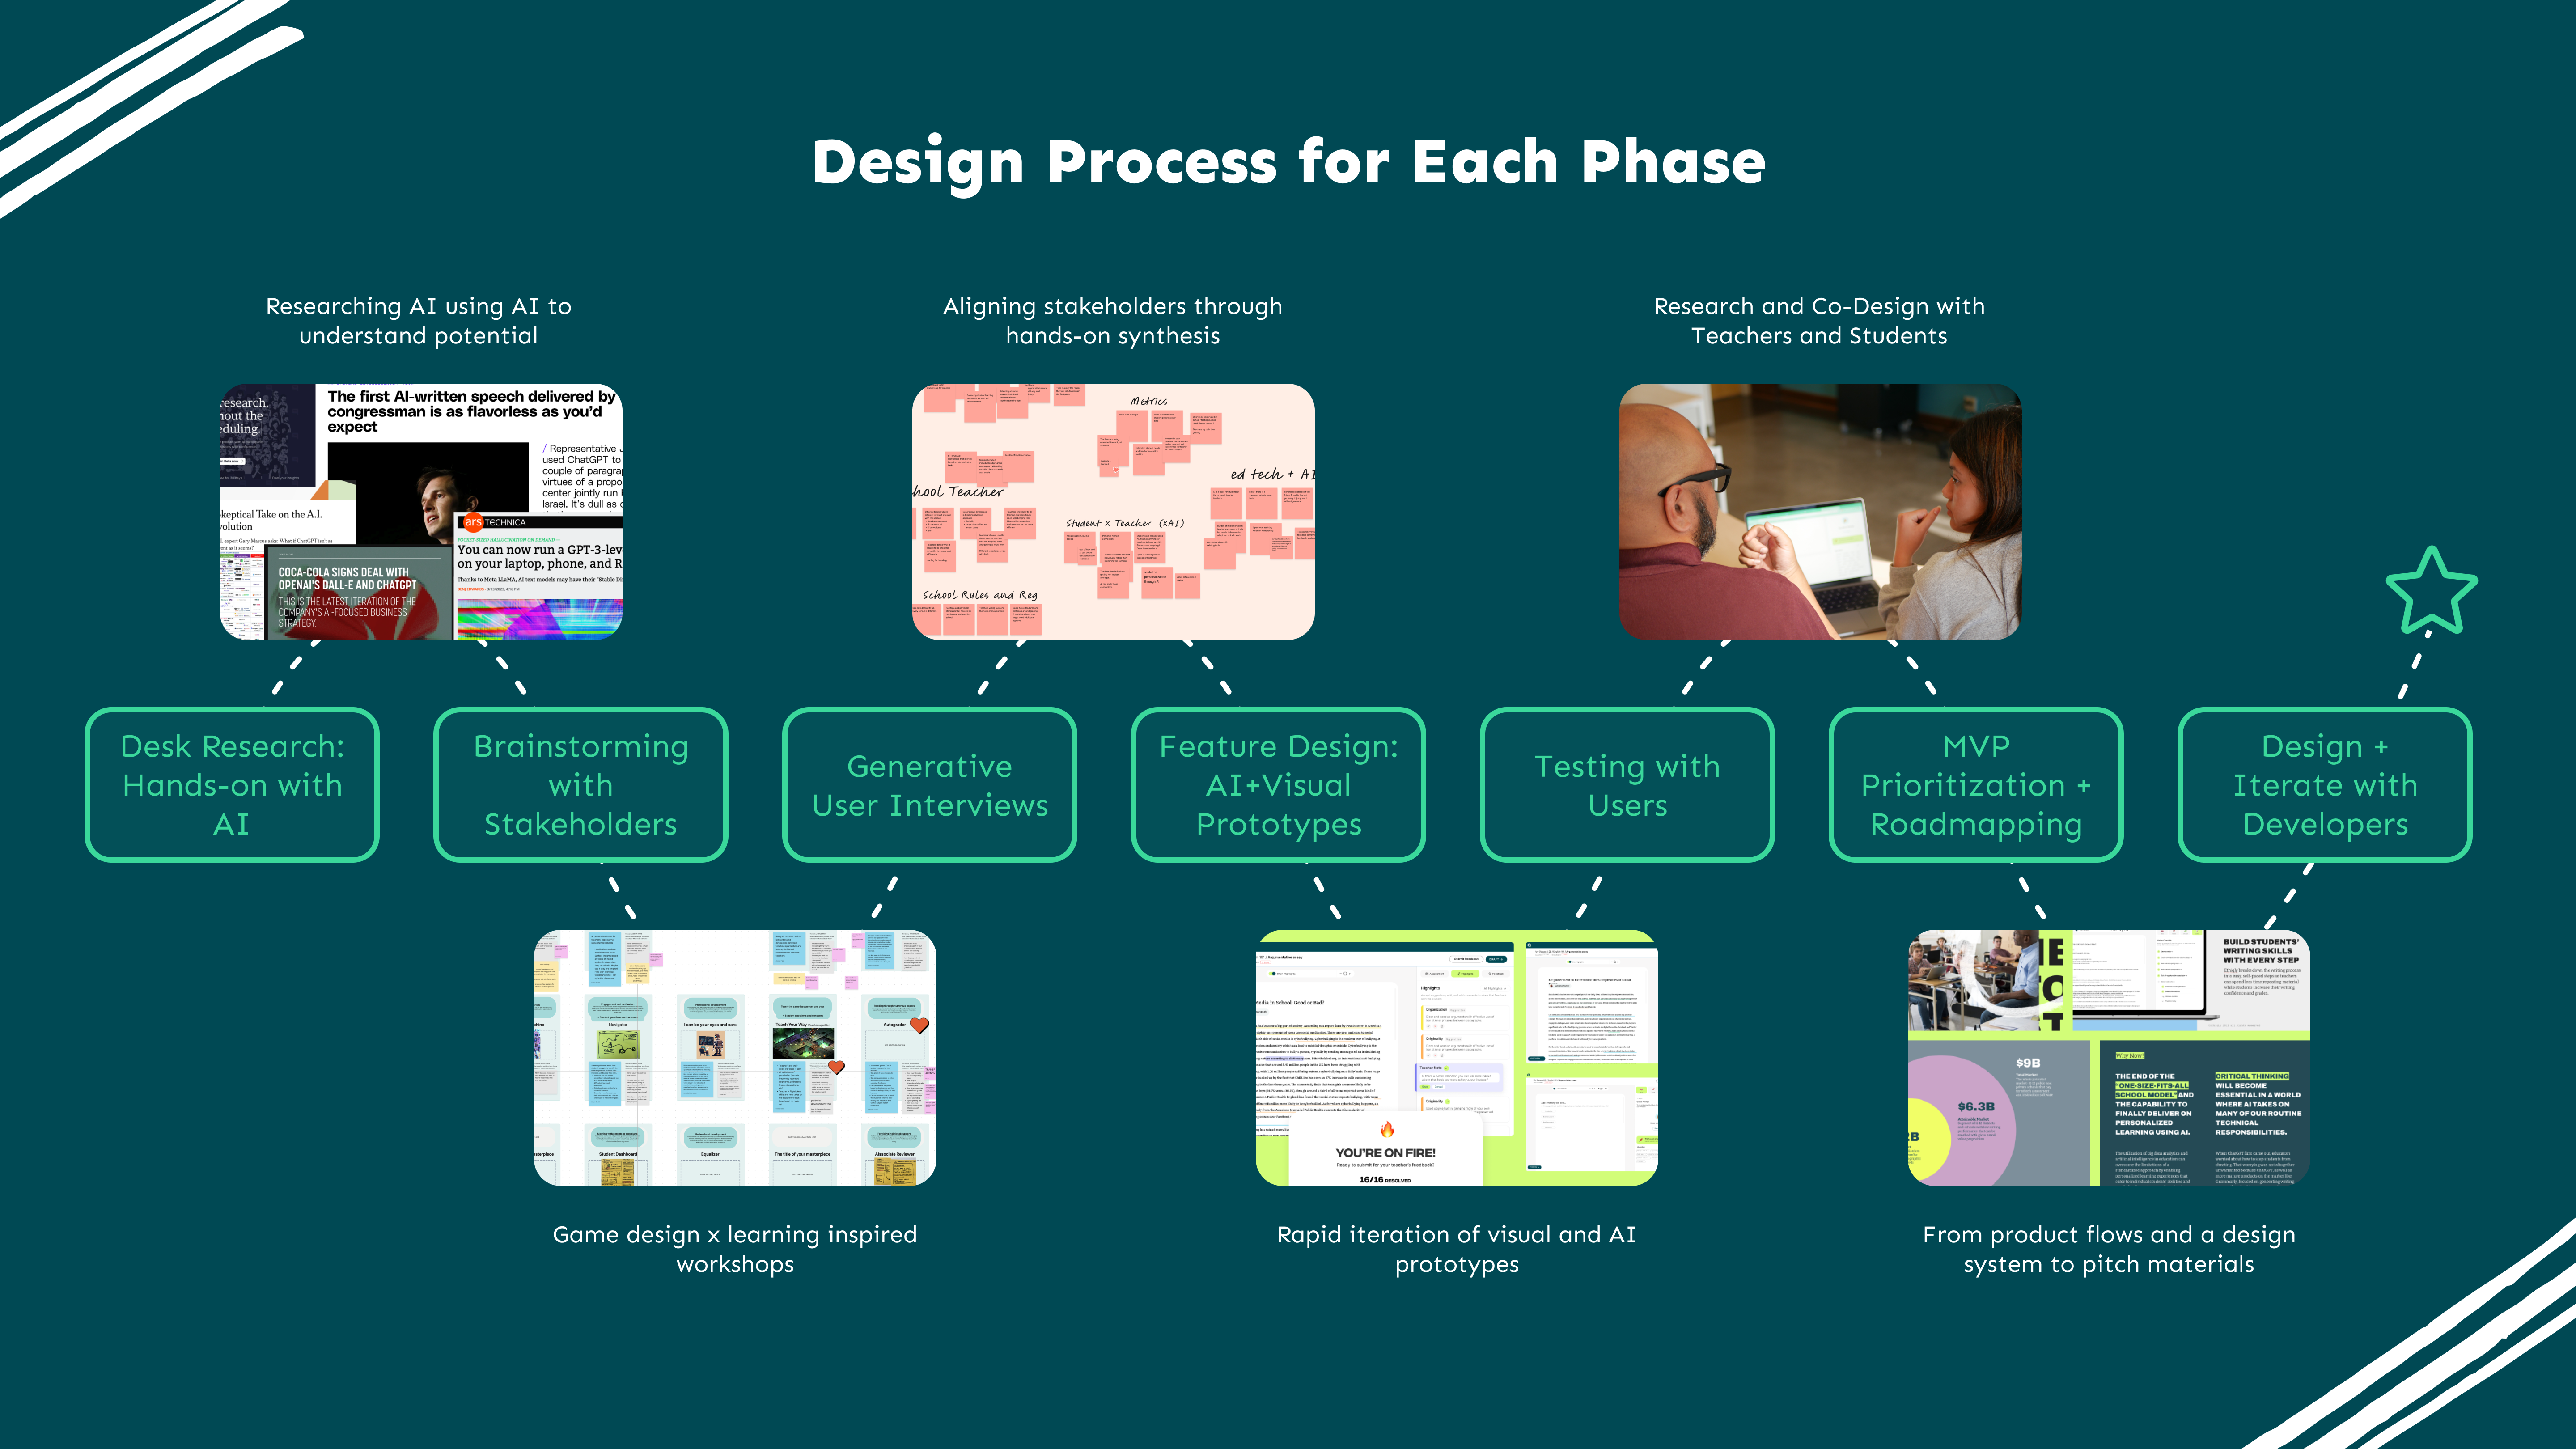 Diagram outlining the design process for each phase, going from brainstorming through research and design iteration loops to MVP prioritization and delivery.